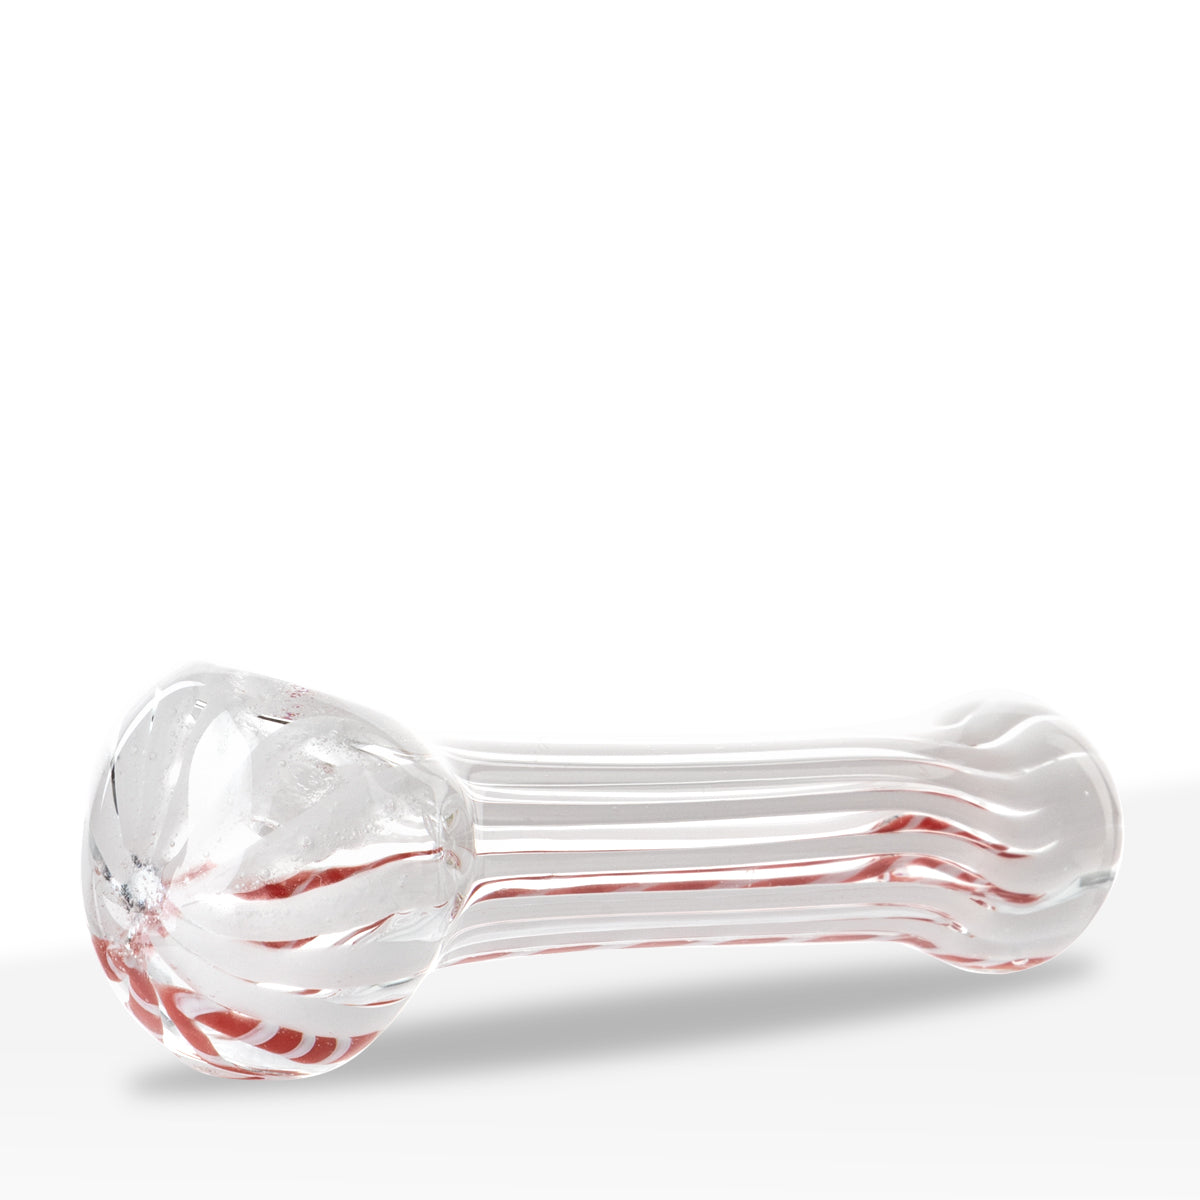 Hand Pipe | Classic Glass Spoon Candy Cane Color Swirl Hand Pipes | 5" - Glass - Assorted Colors Glass Hand Pipe Biohazard Inc